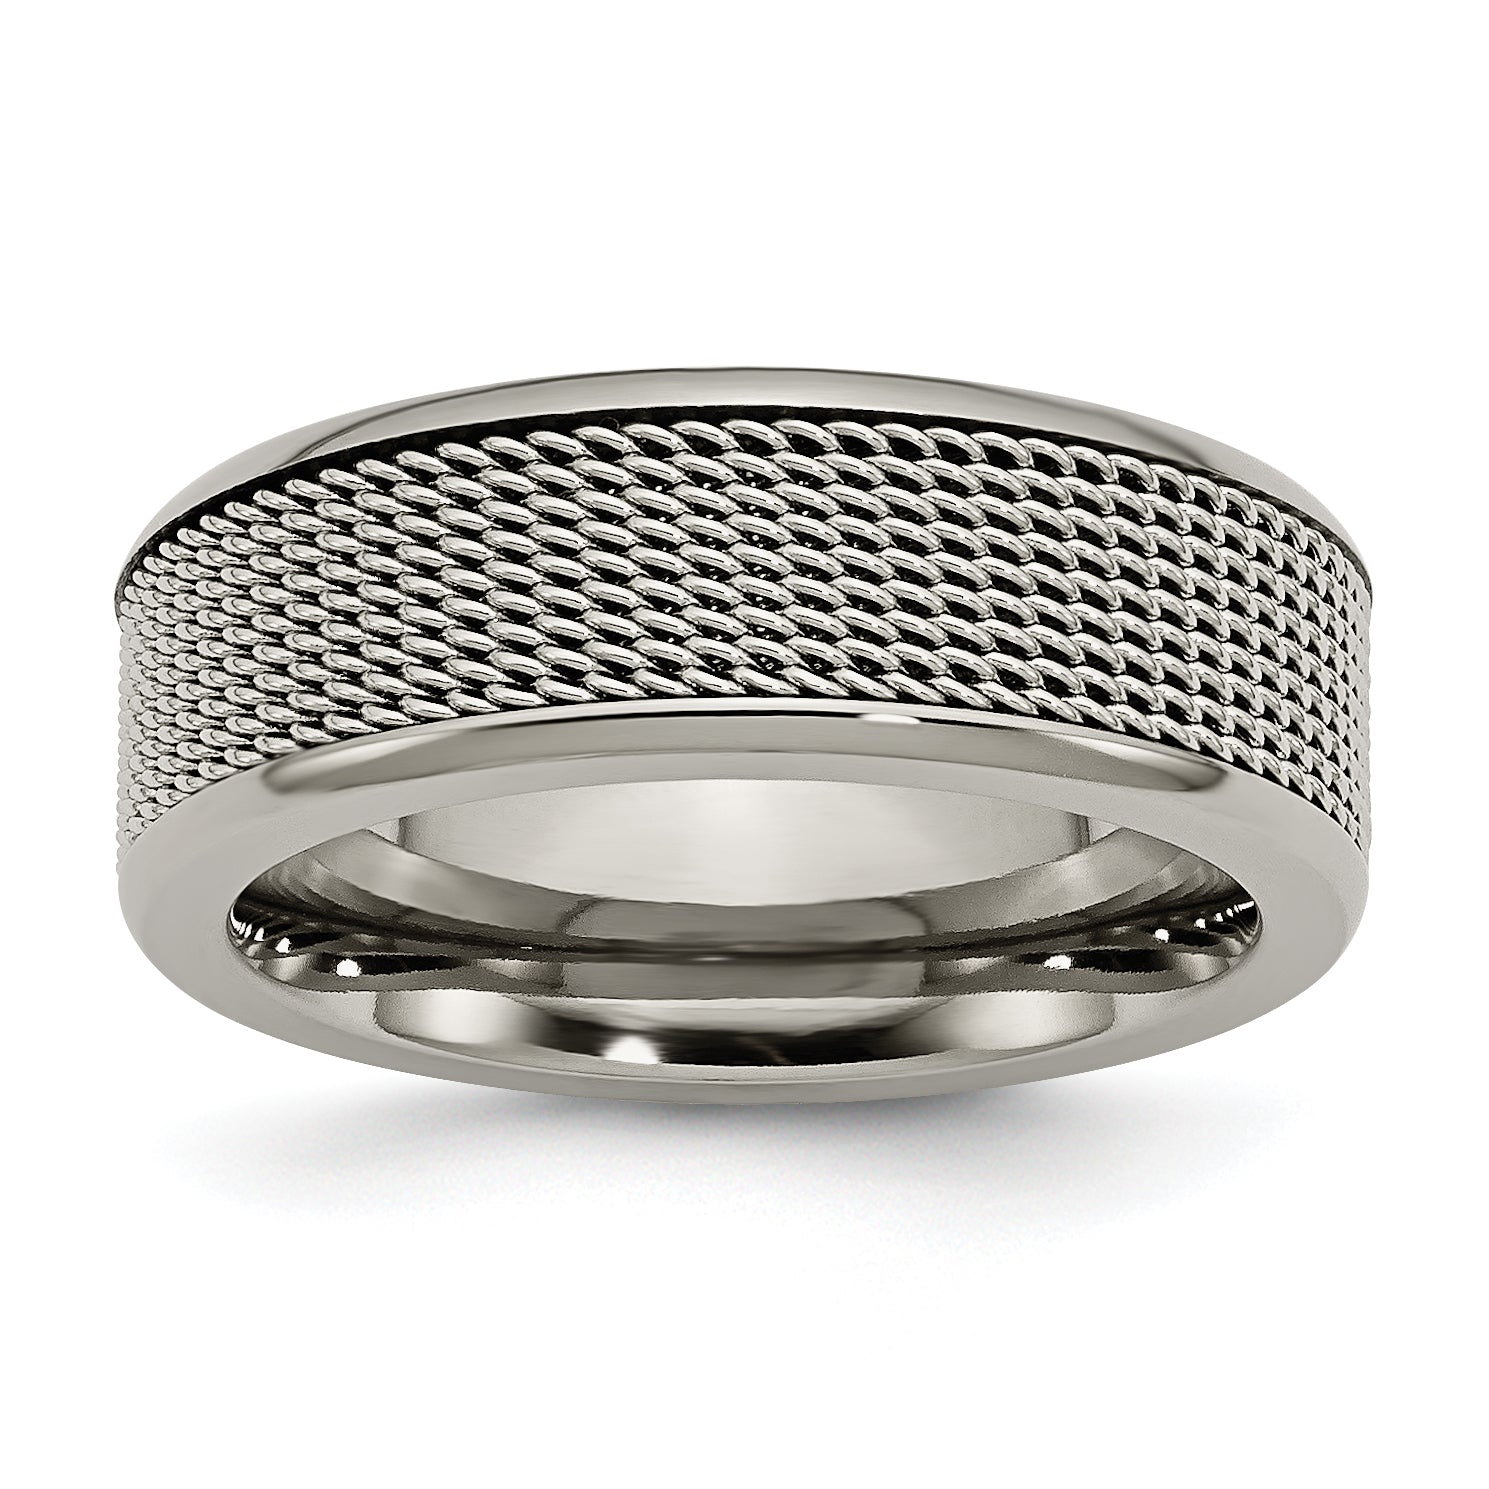 Titanium Base with Stainless Steel Mesh Center 8mm Band